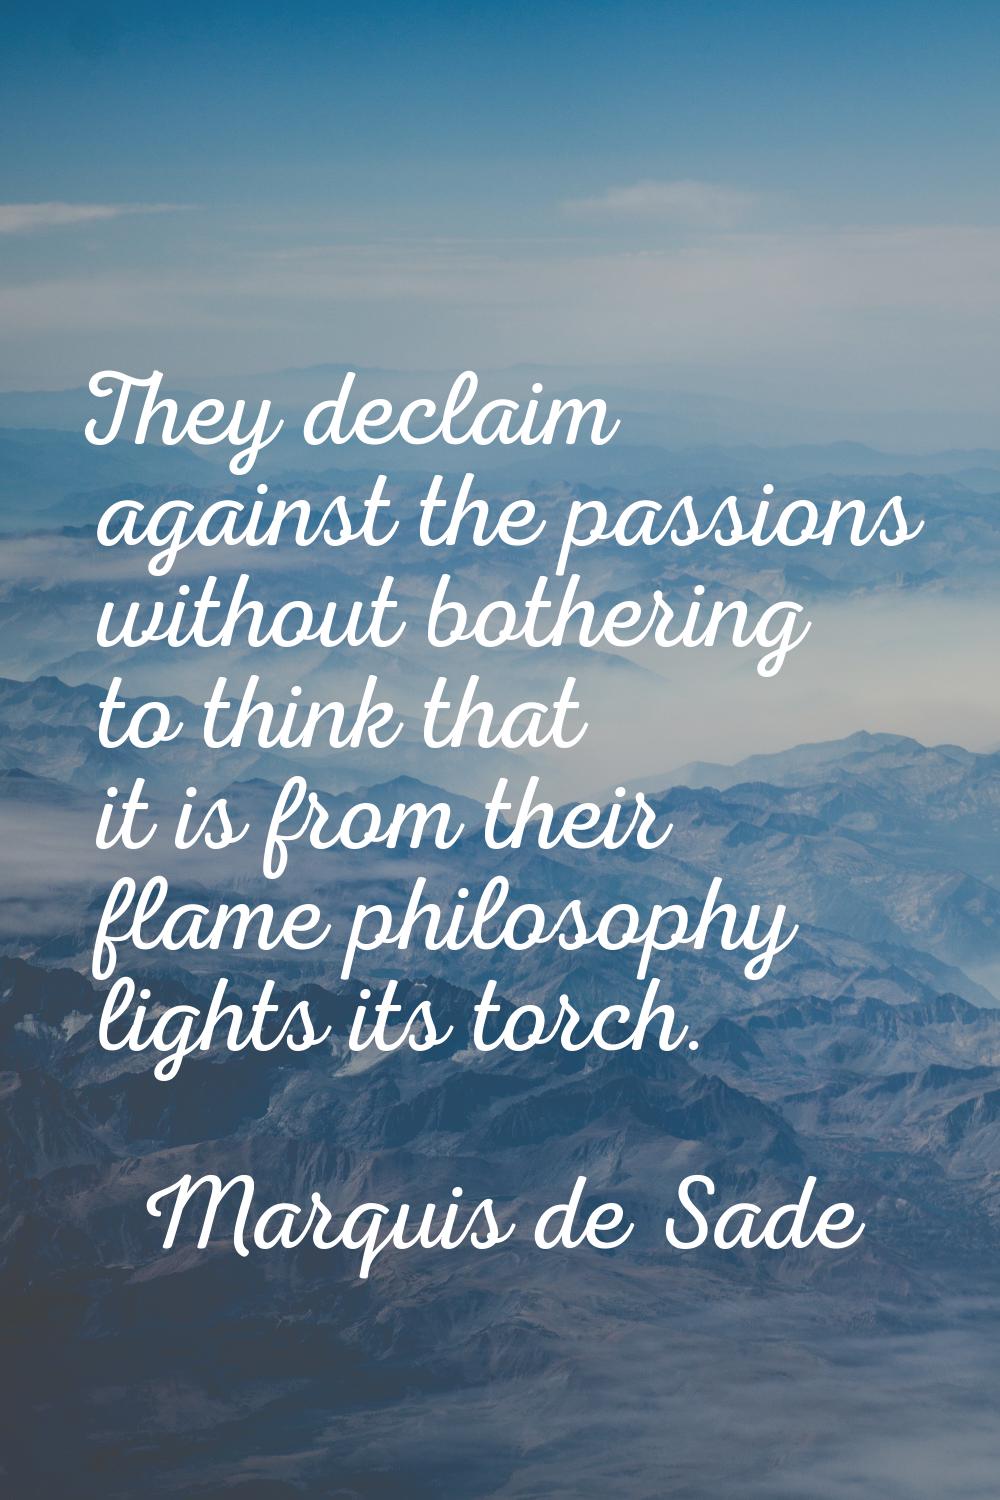 They declaim against the passions without bothering to think that it is from their flame philosophy